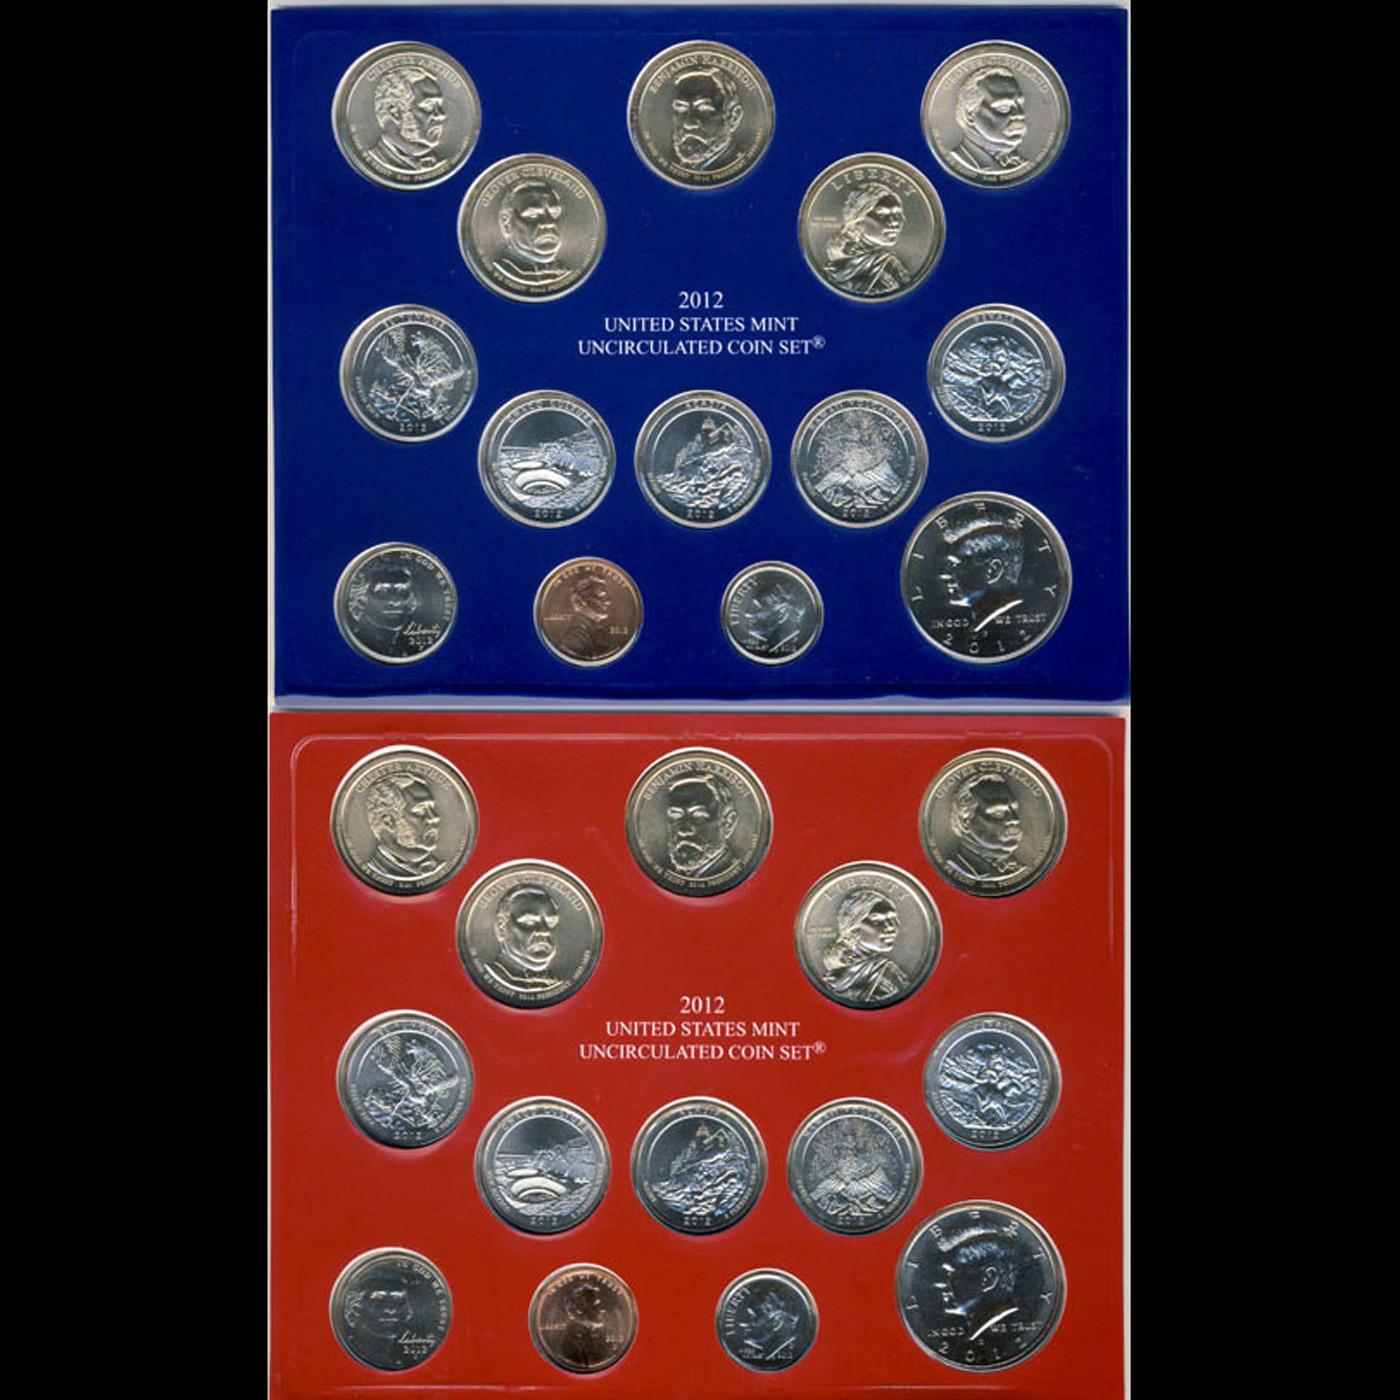 2012 United States Mint Uncirculated Coin Set 28 coins